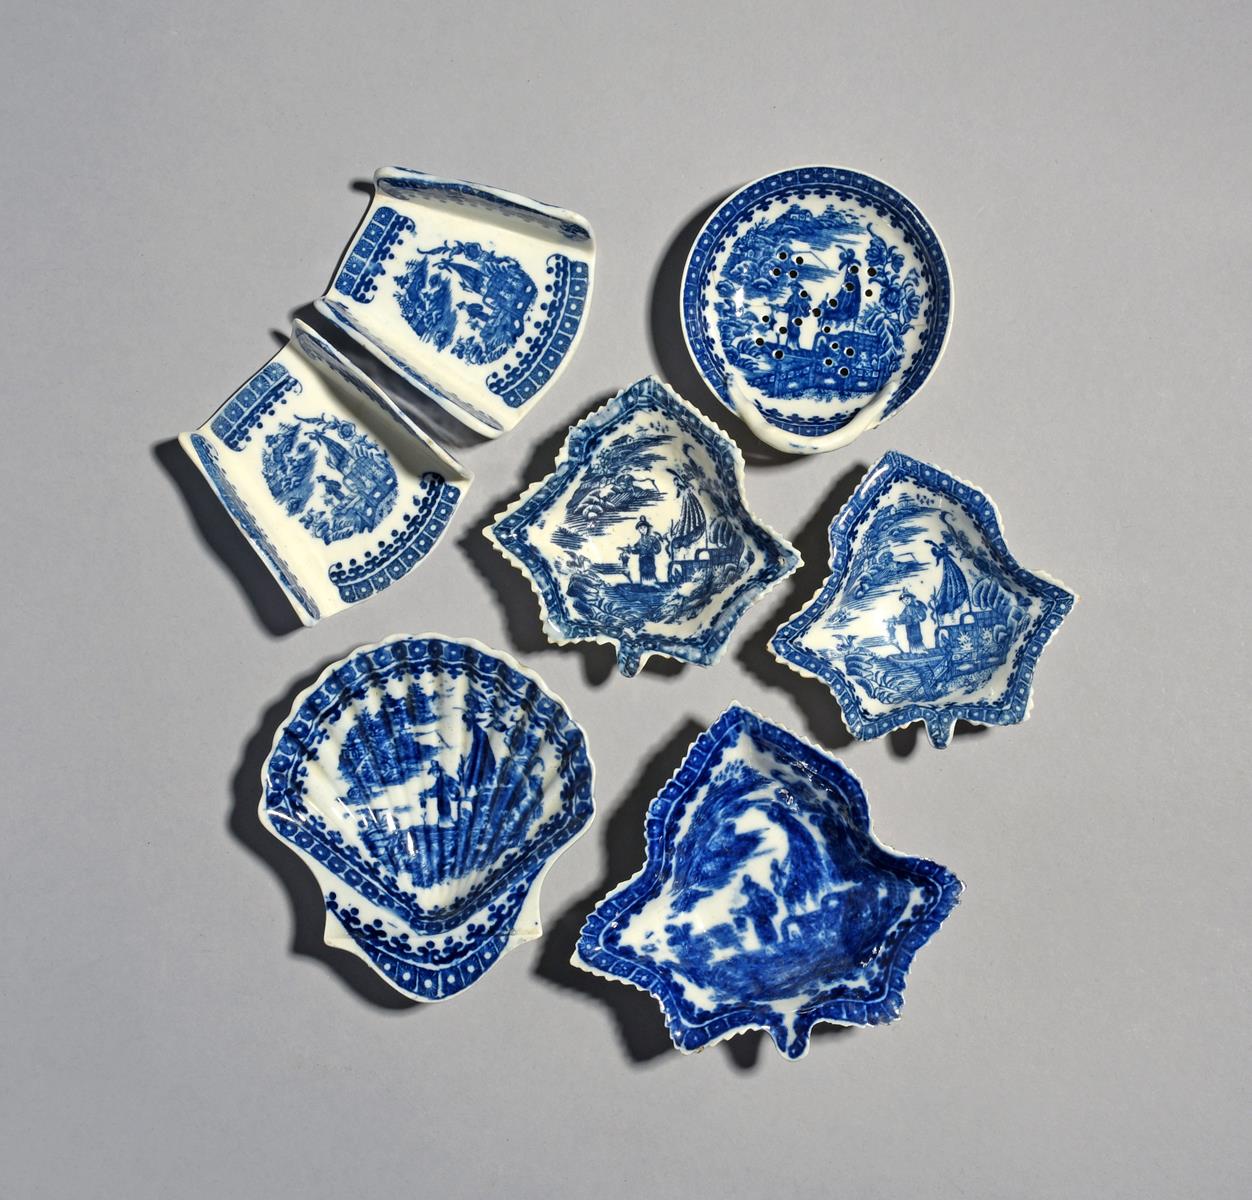 Four Caughley blue and white pickle dishes, c.1770-85, three of vine leaf shape and one scallop